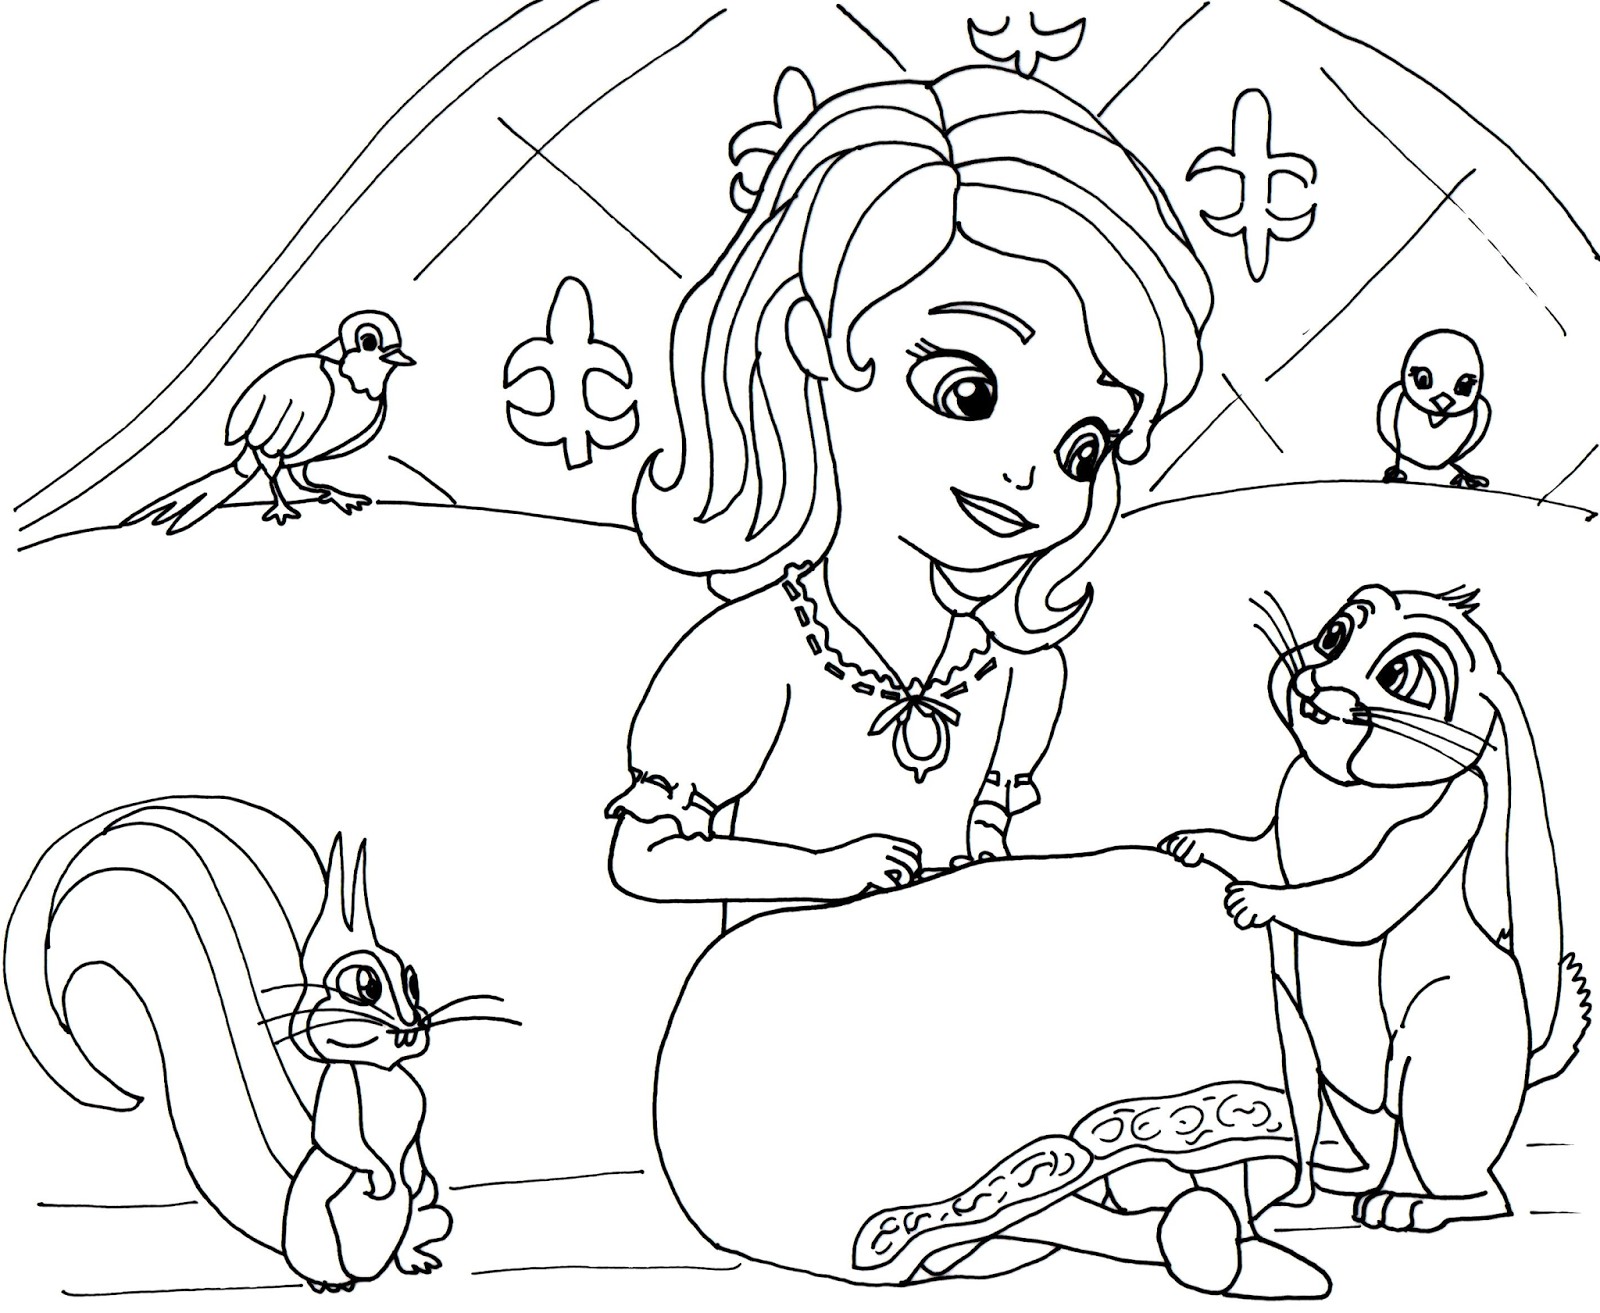 here to print Sofia the first coloring page in her night gown outfit with her pets Mia Robin Whatnaught and Clover